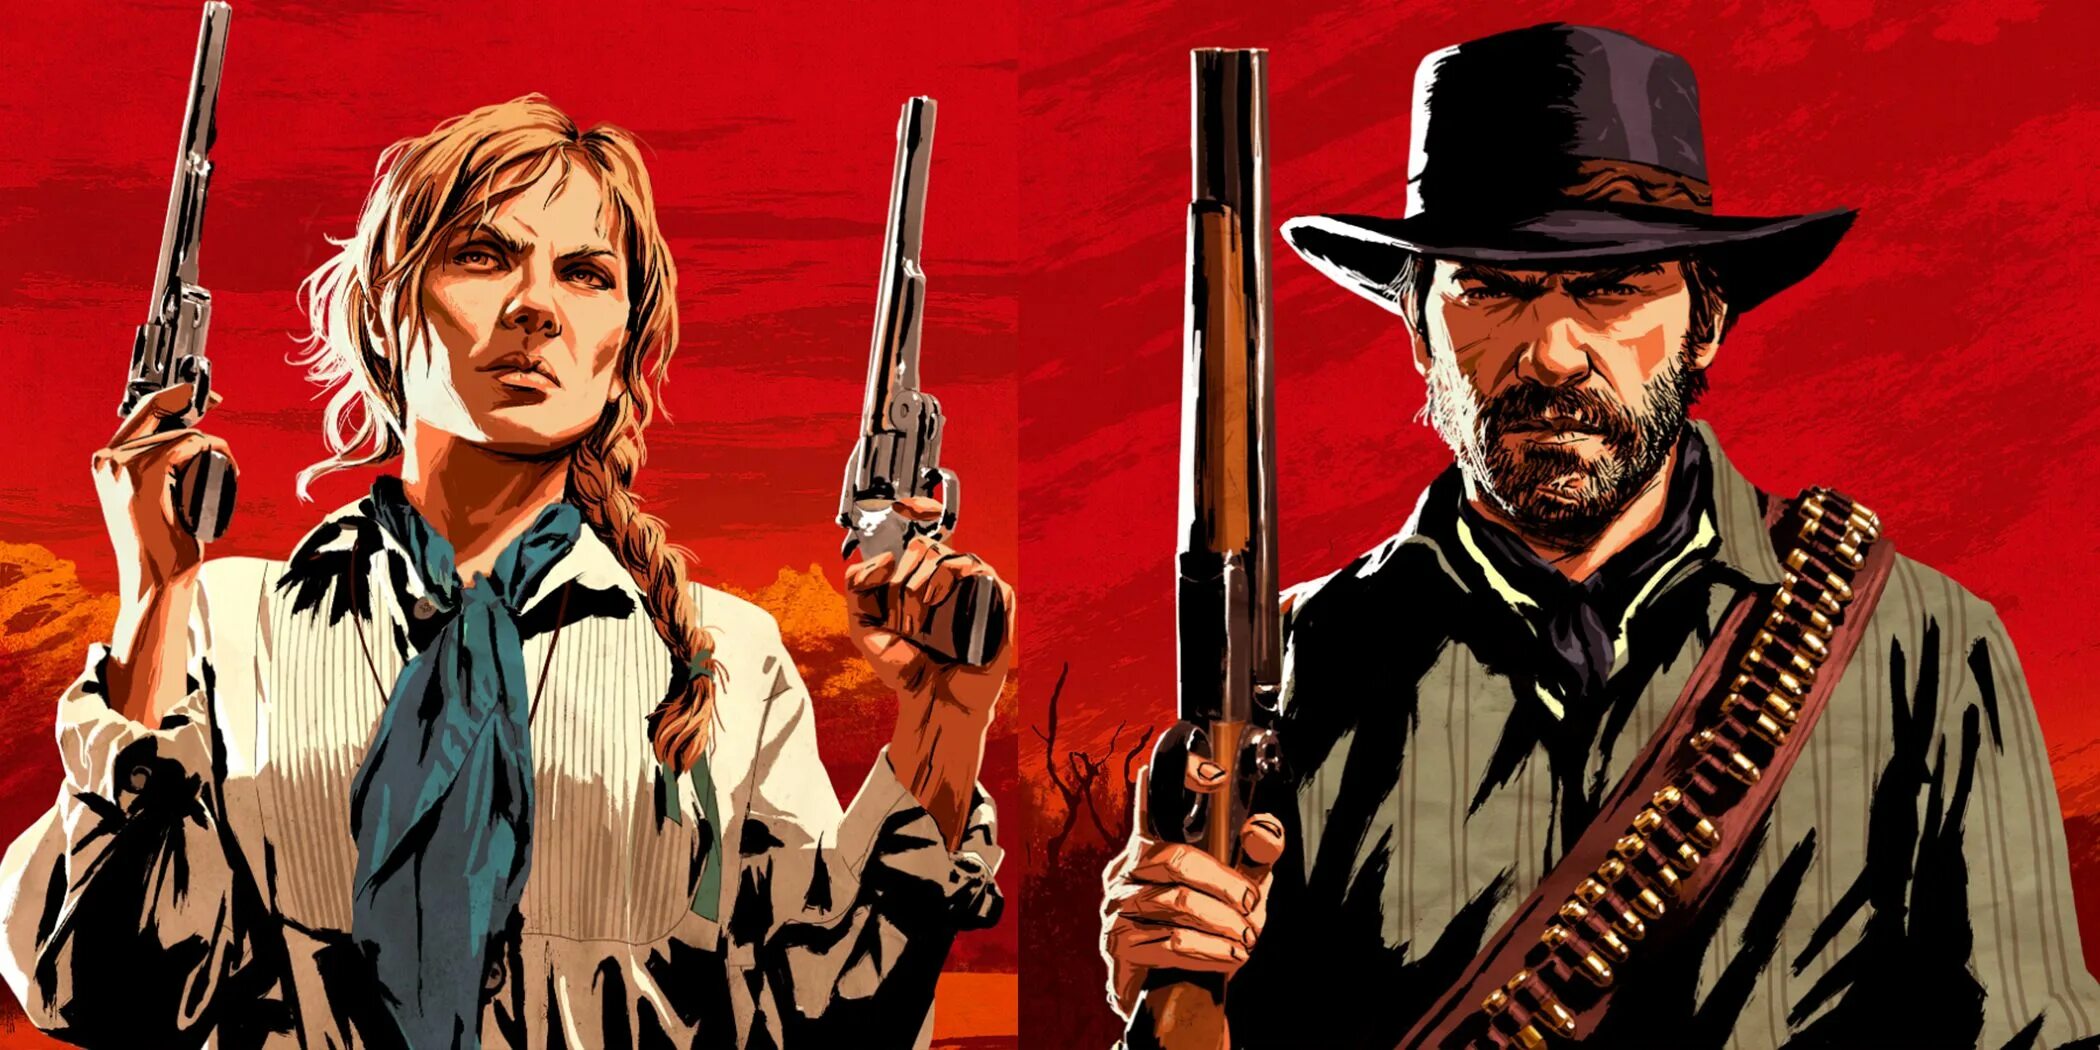 Red dead redemption series. Ред дед редемпшен 2. Ред дед редемпшен 2 арт. Read Dead Redemption 2 арт. Red Dead Redemption 1.